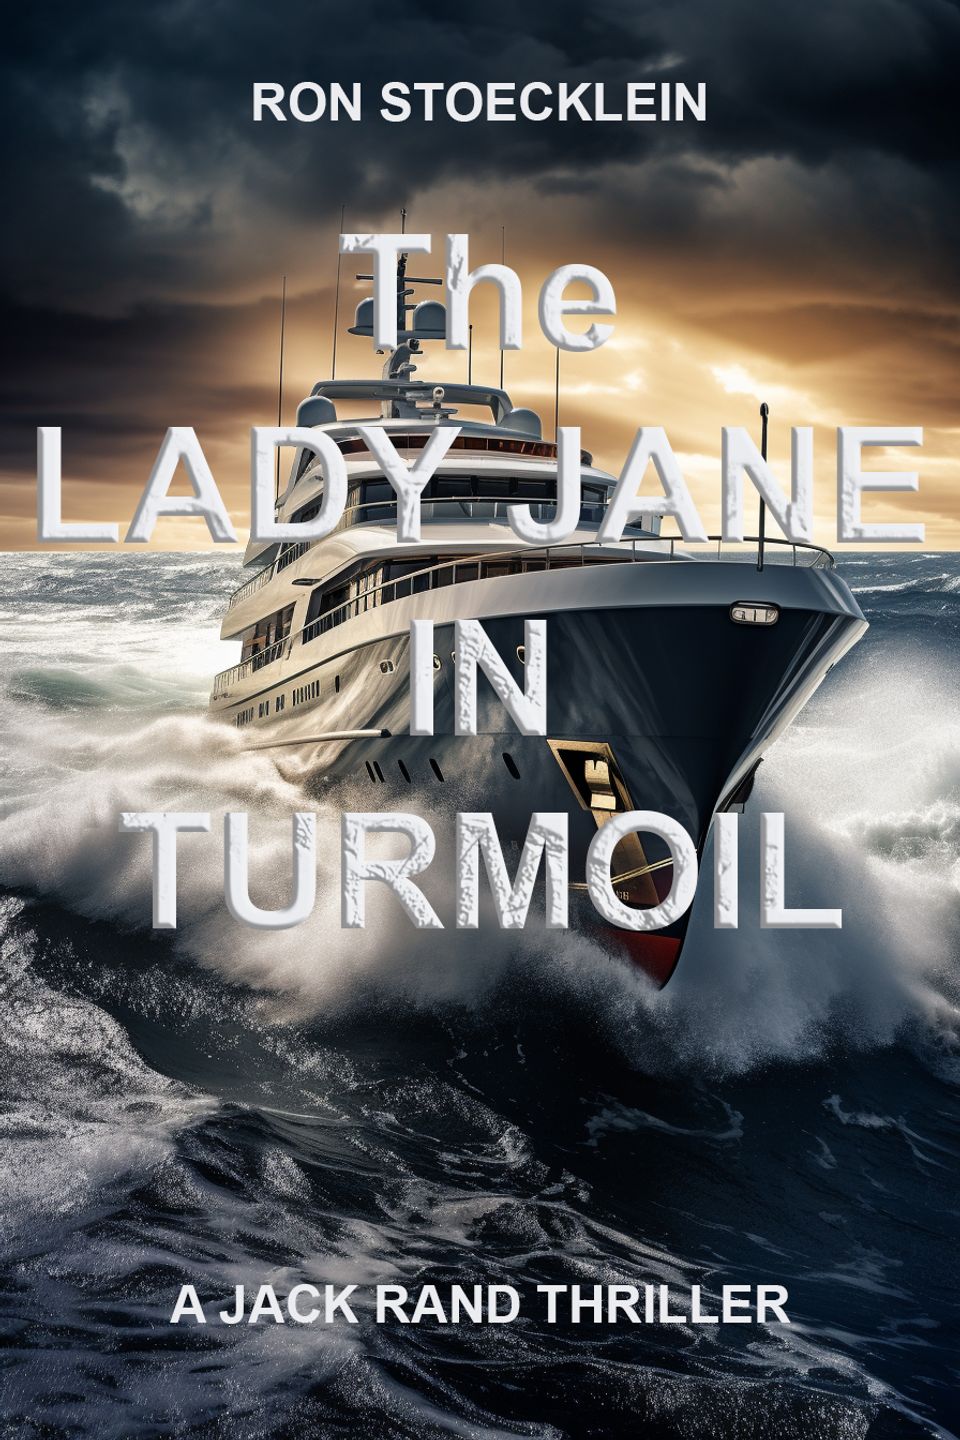 Cover yacht stormy with title copy